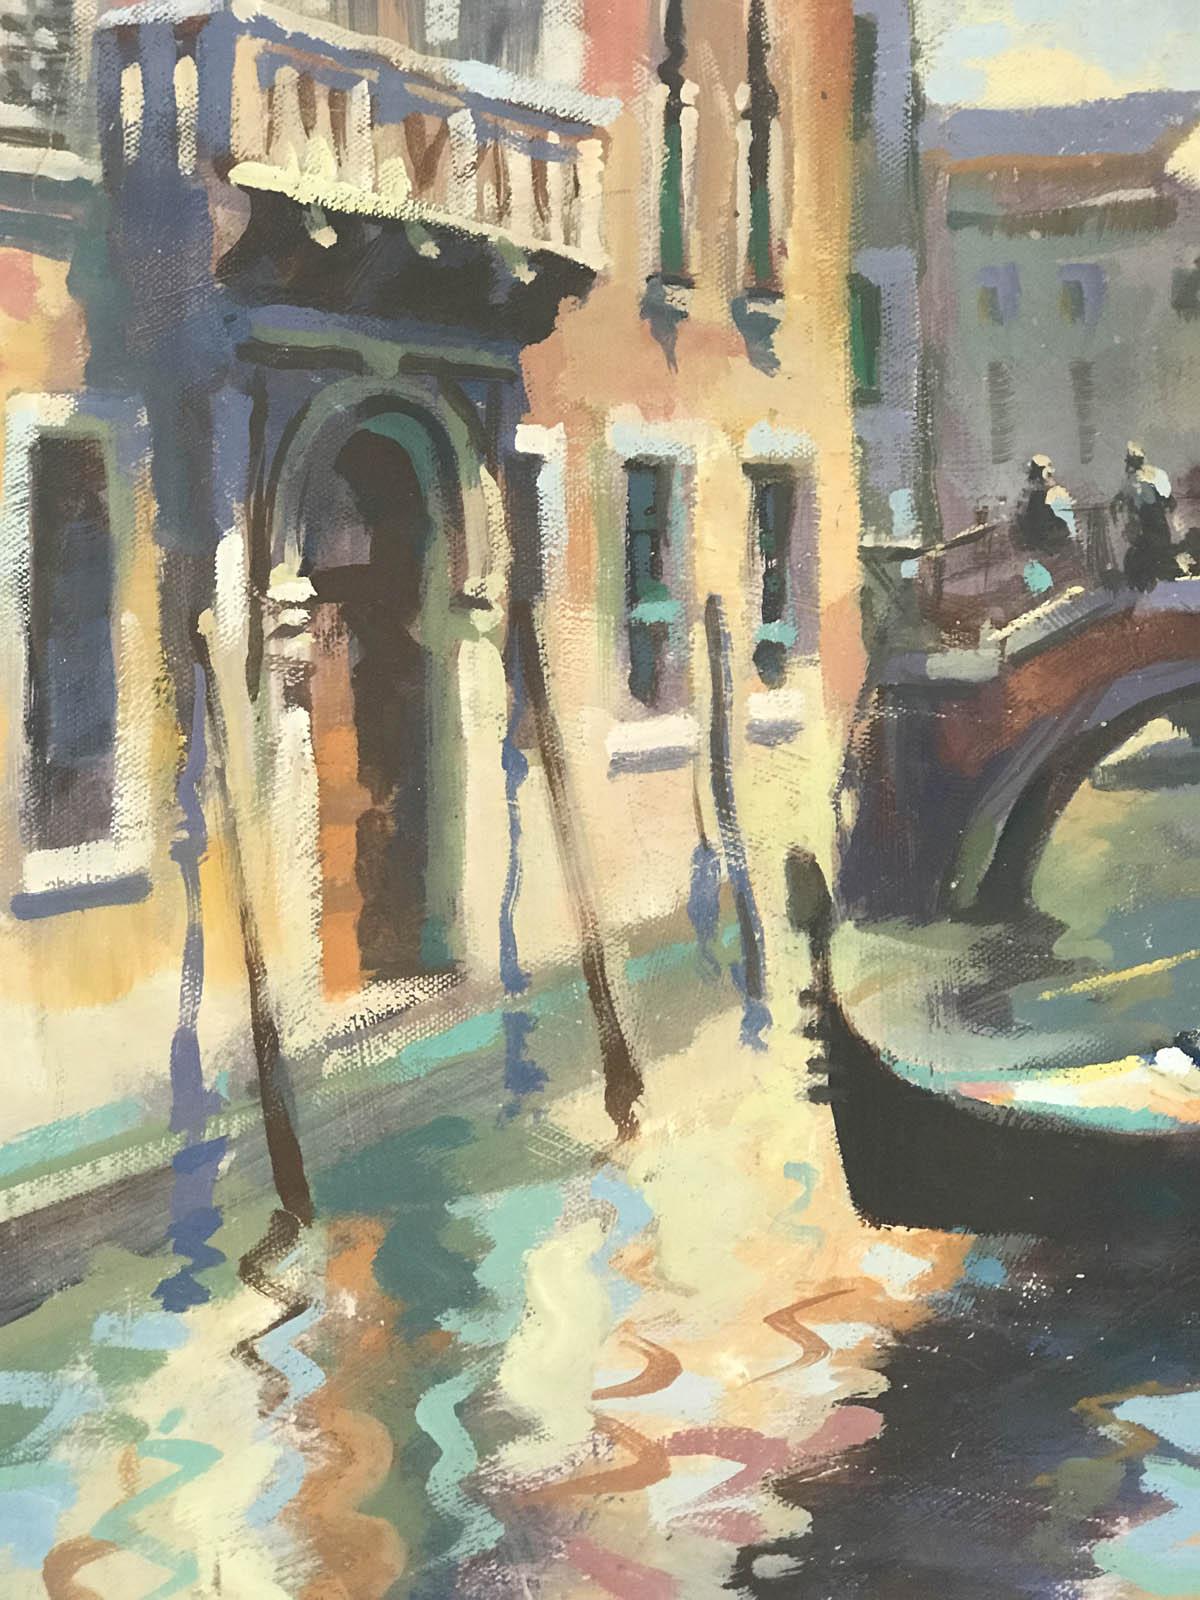 Trevor Waugh
Please note that in situ images are purely an indication of how a piece may look.

Venetian Canal is an original Trevor Waugh oil painting. The highly contrasted colours in the water and narrow perspective created by the positioning of